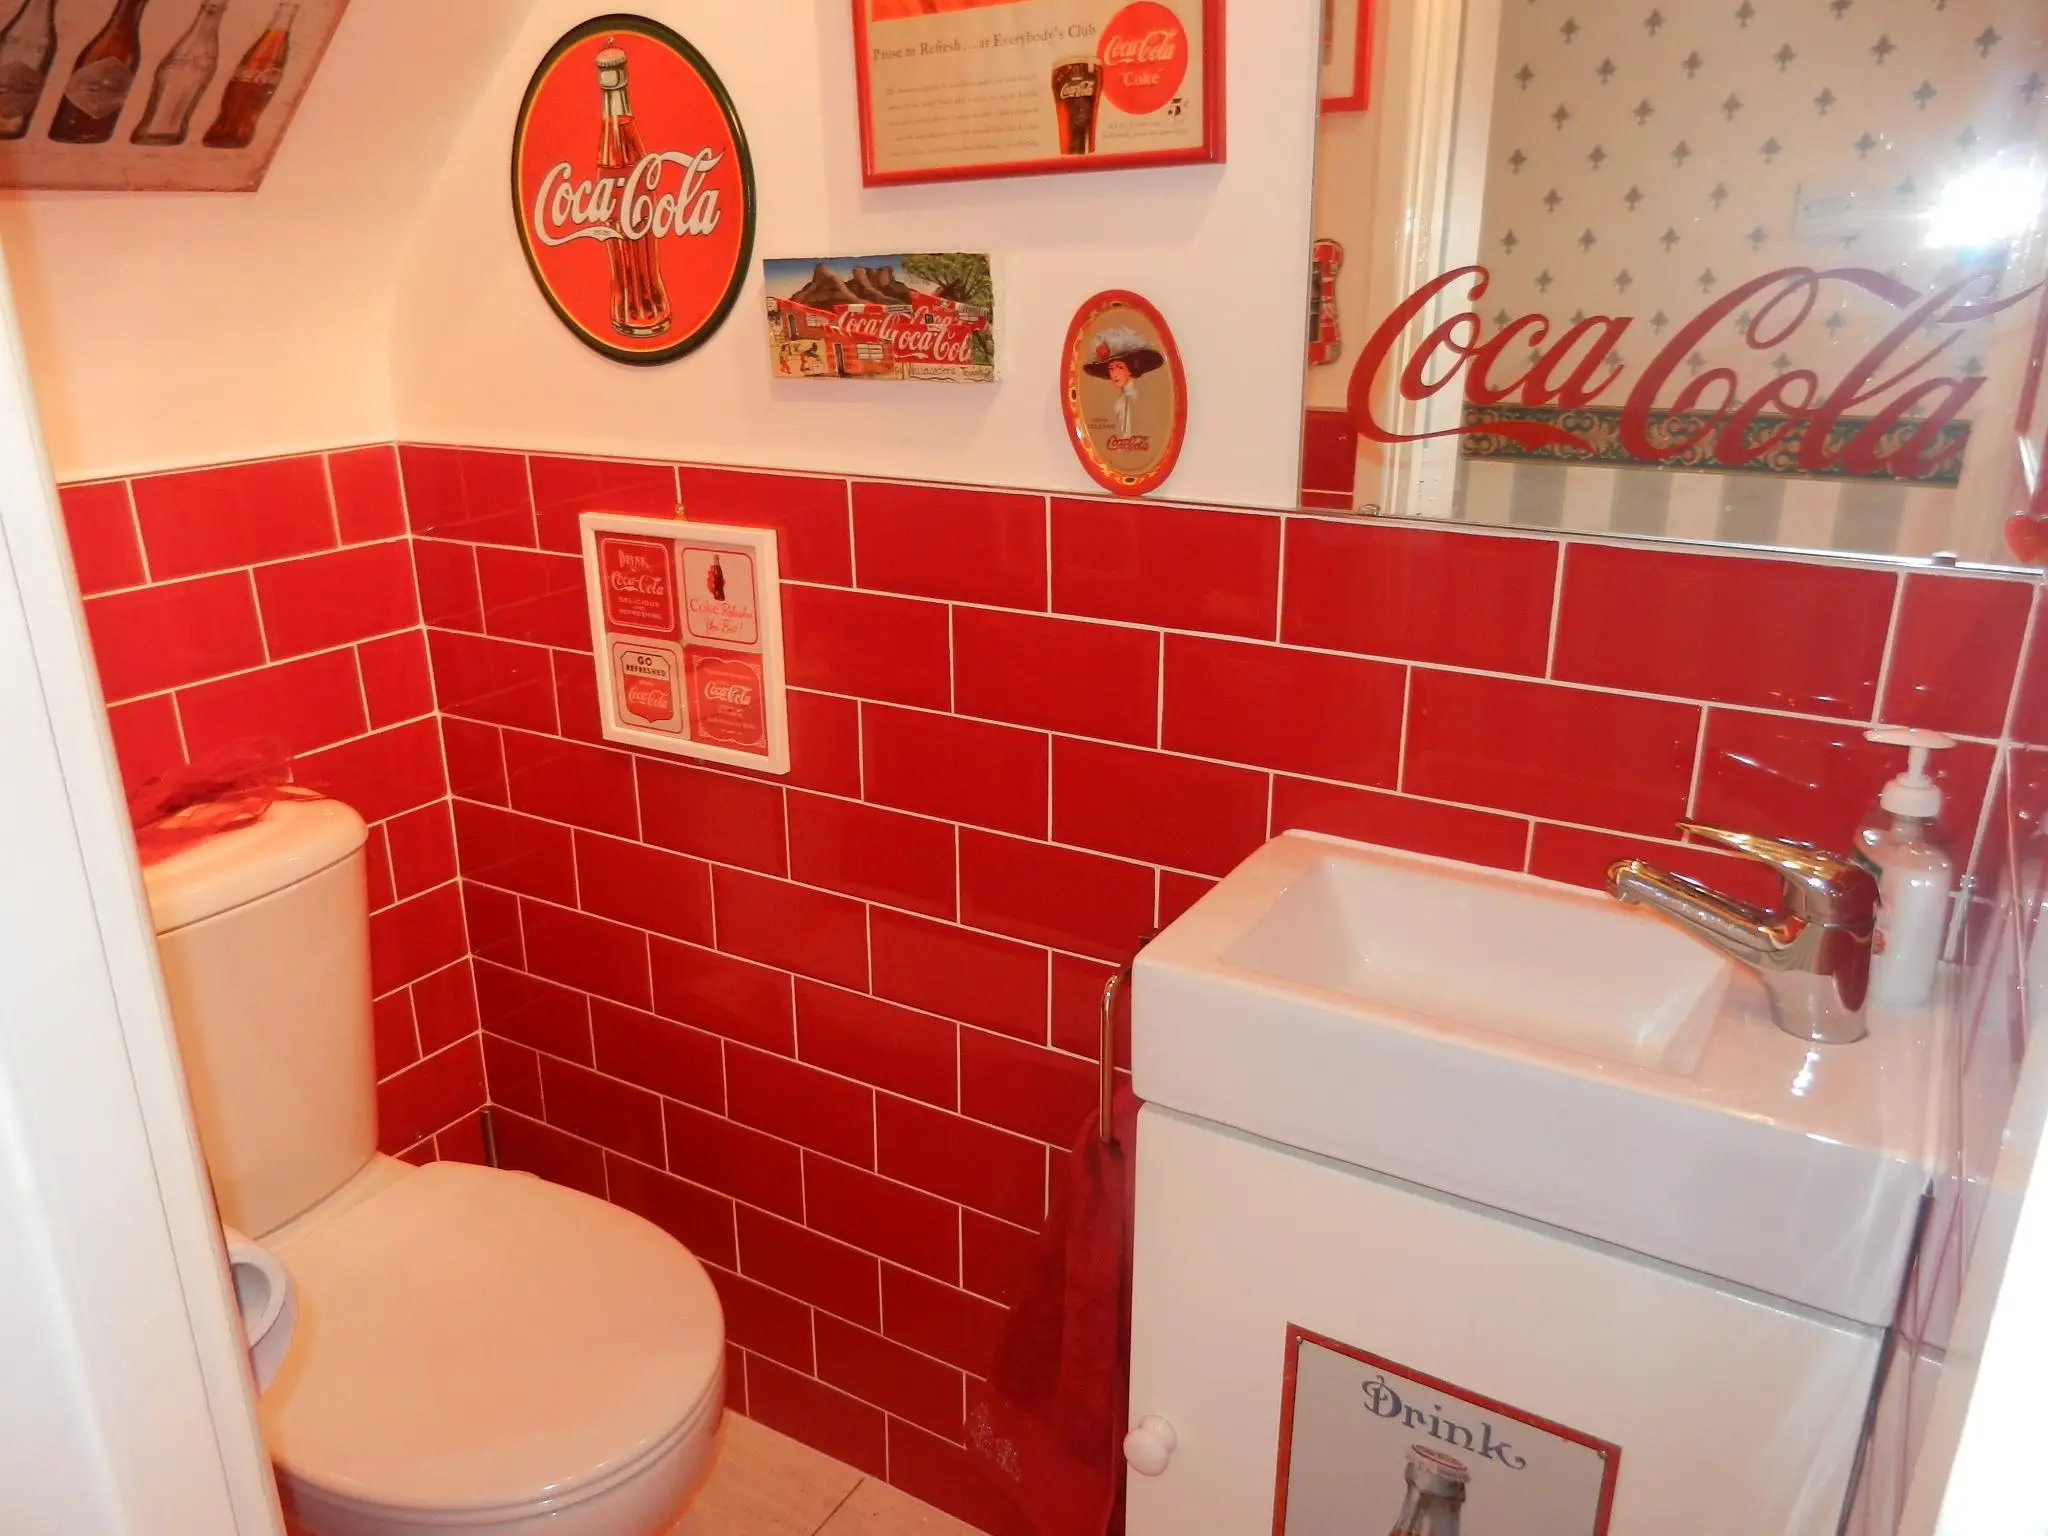 Coca Cola mum transforms home into shrine to fizzy drink. Photo from Facebook